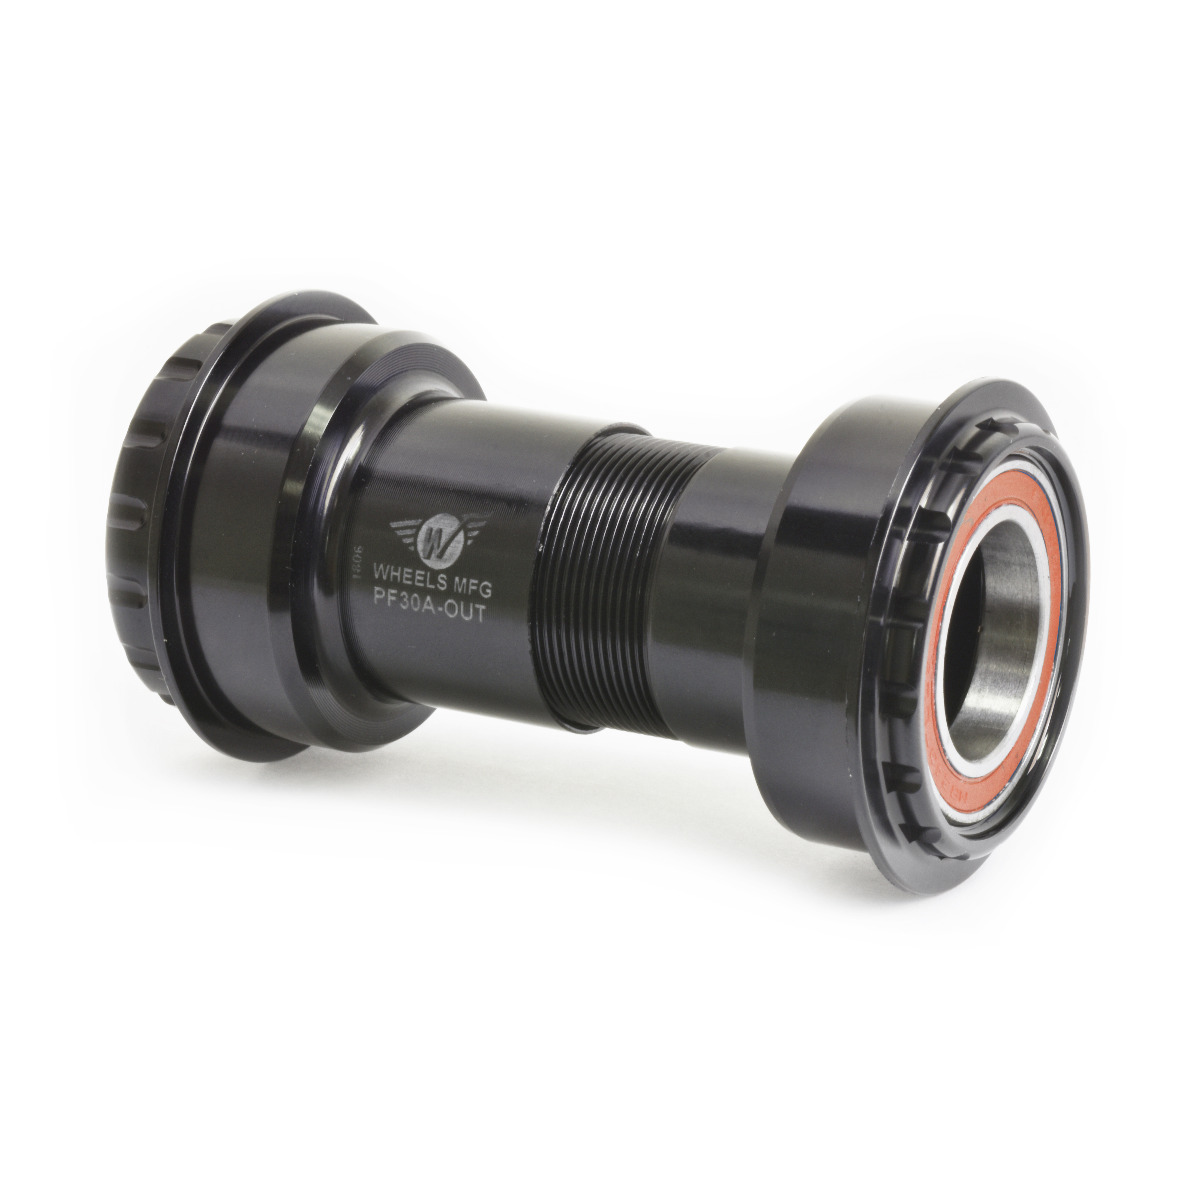 Wheels Manufacturing Inc. PF30A Outboard Angular Contact Bottom Bracket for 24mm Shimano Spindles Color | Model | Spindle | Width: Black | PF30A | 24mm (Shimano) | 73mm